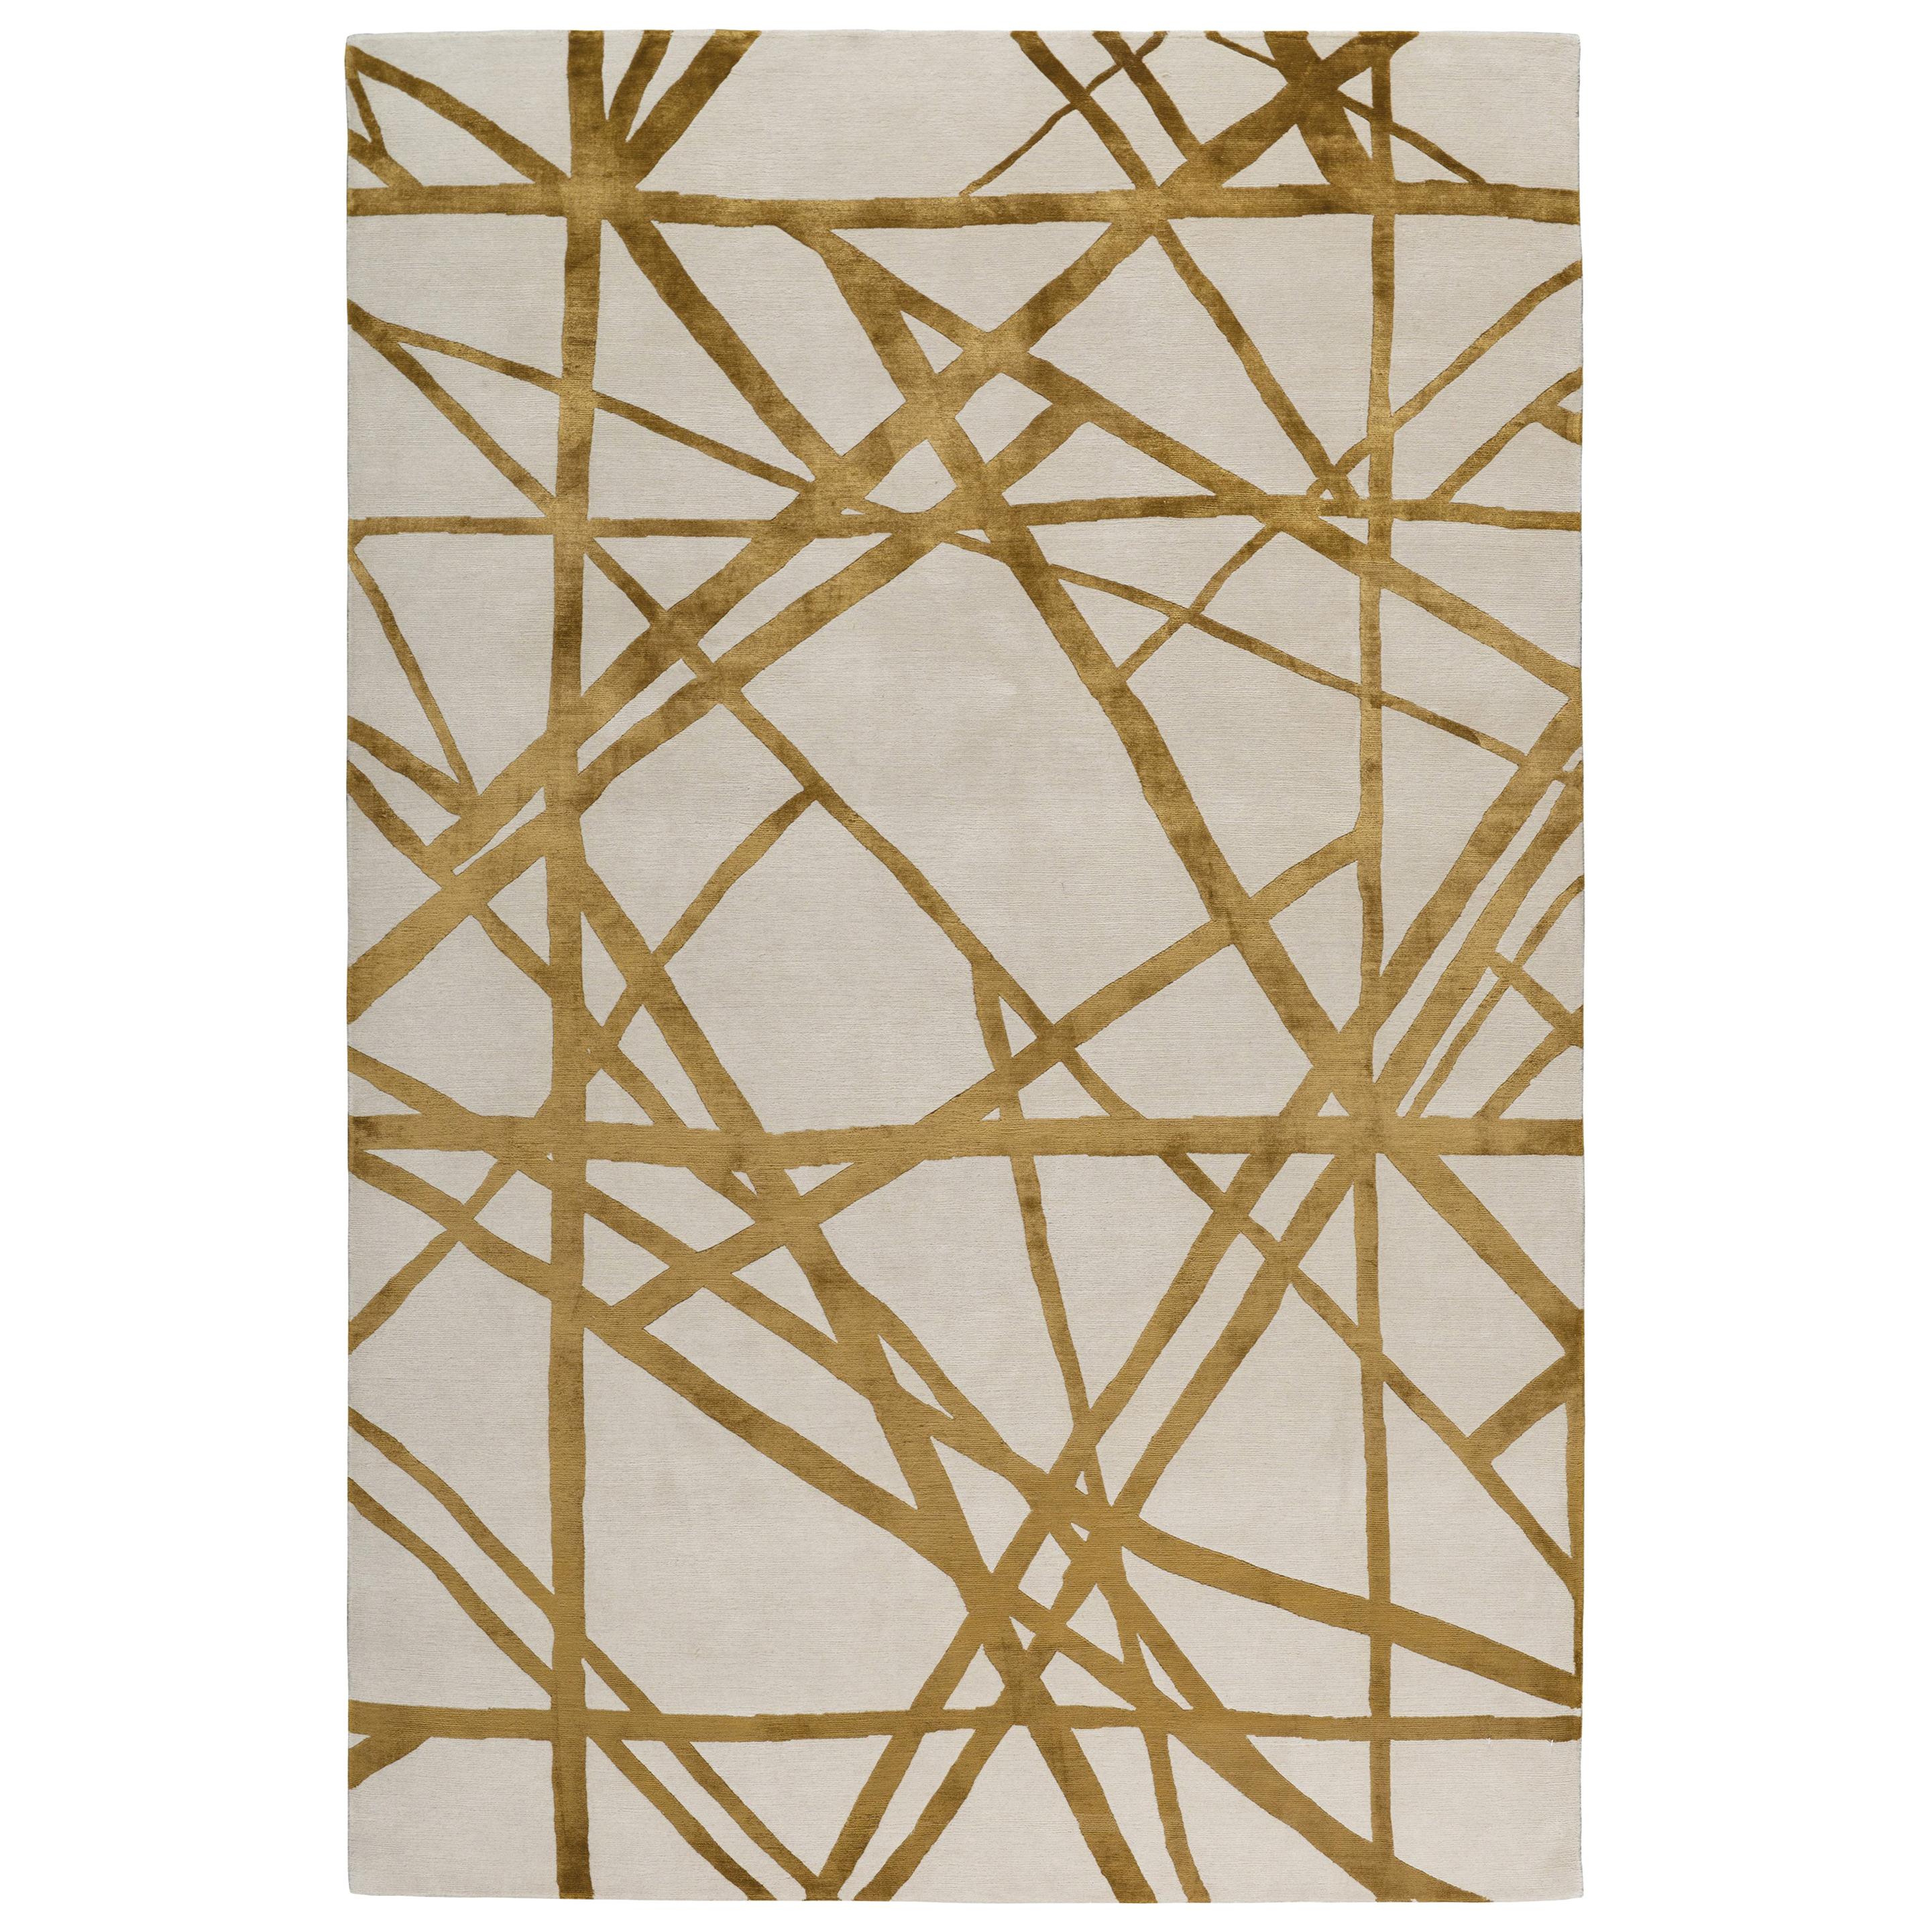 Channels Copper Hand Knotted 14x10 Rug in Wool and Silk by Kelly Wearstler